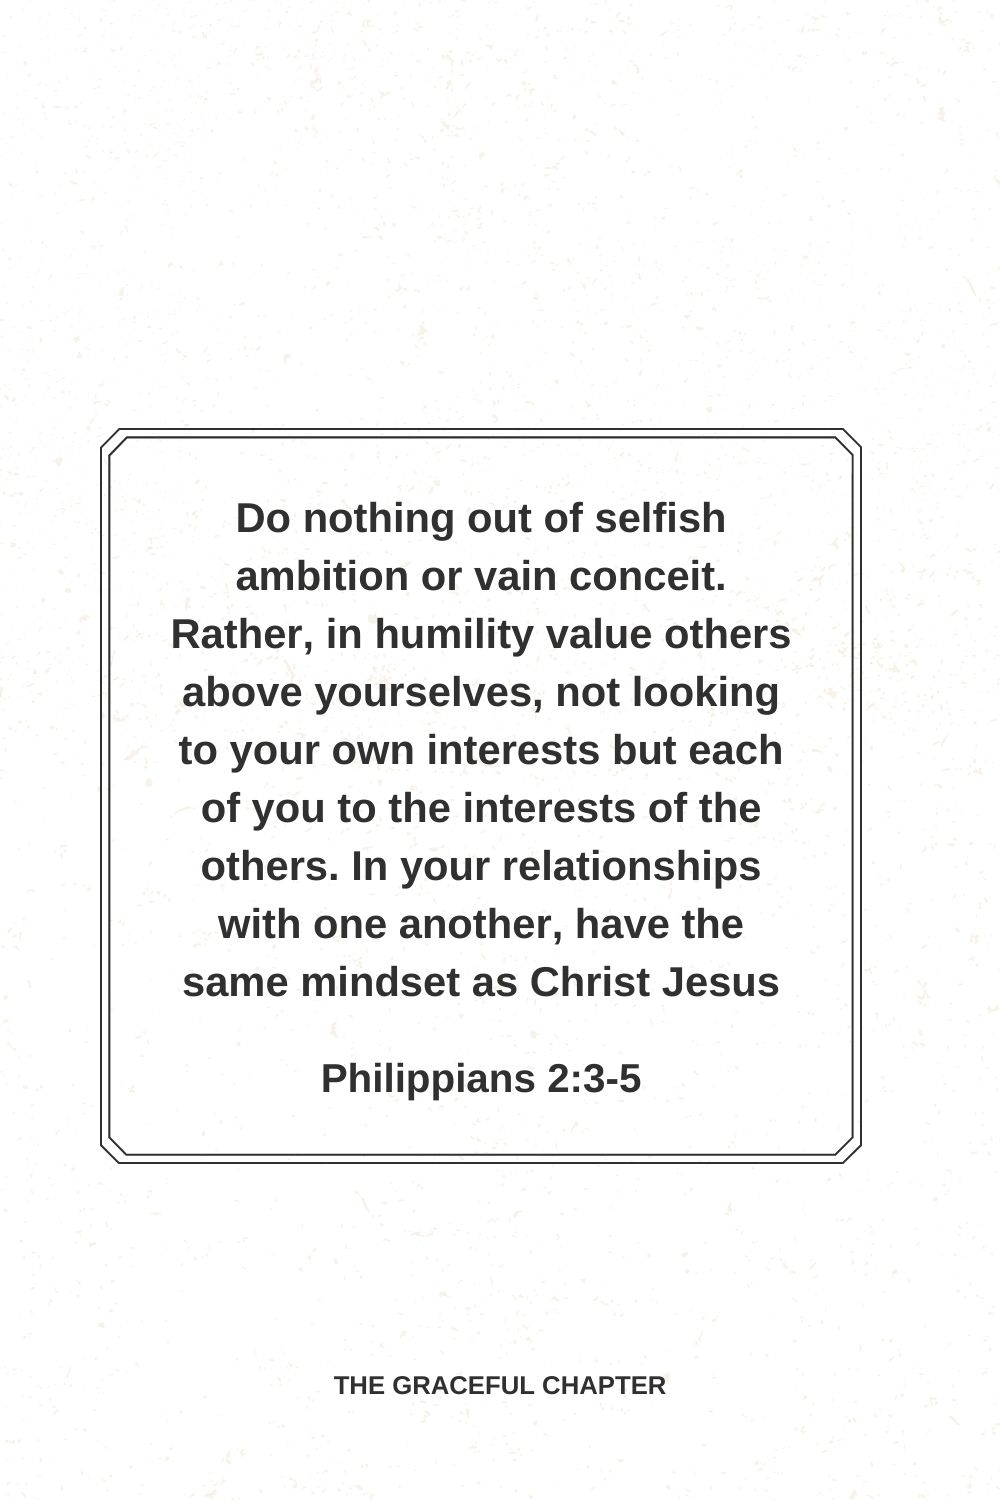 Do nothing out of selfish ambition or vain conceit. Rather, in humility value others above yourselves, not looking to your own interests but each of you to the interests of the others. In your relationships with one another, have the same mindset as Christ Jesus. Philippians 2:3-5